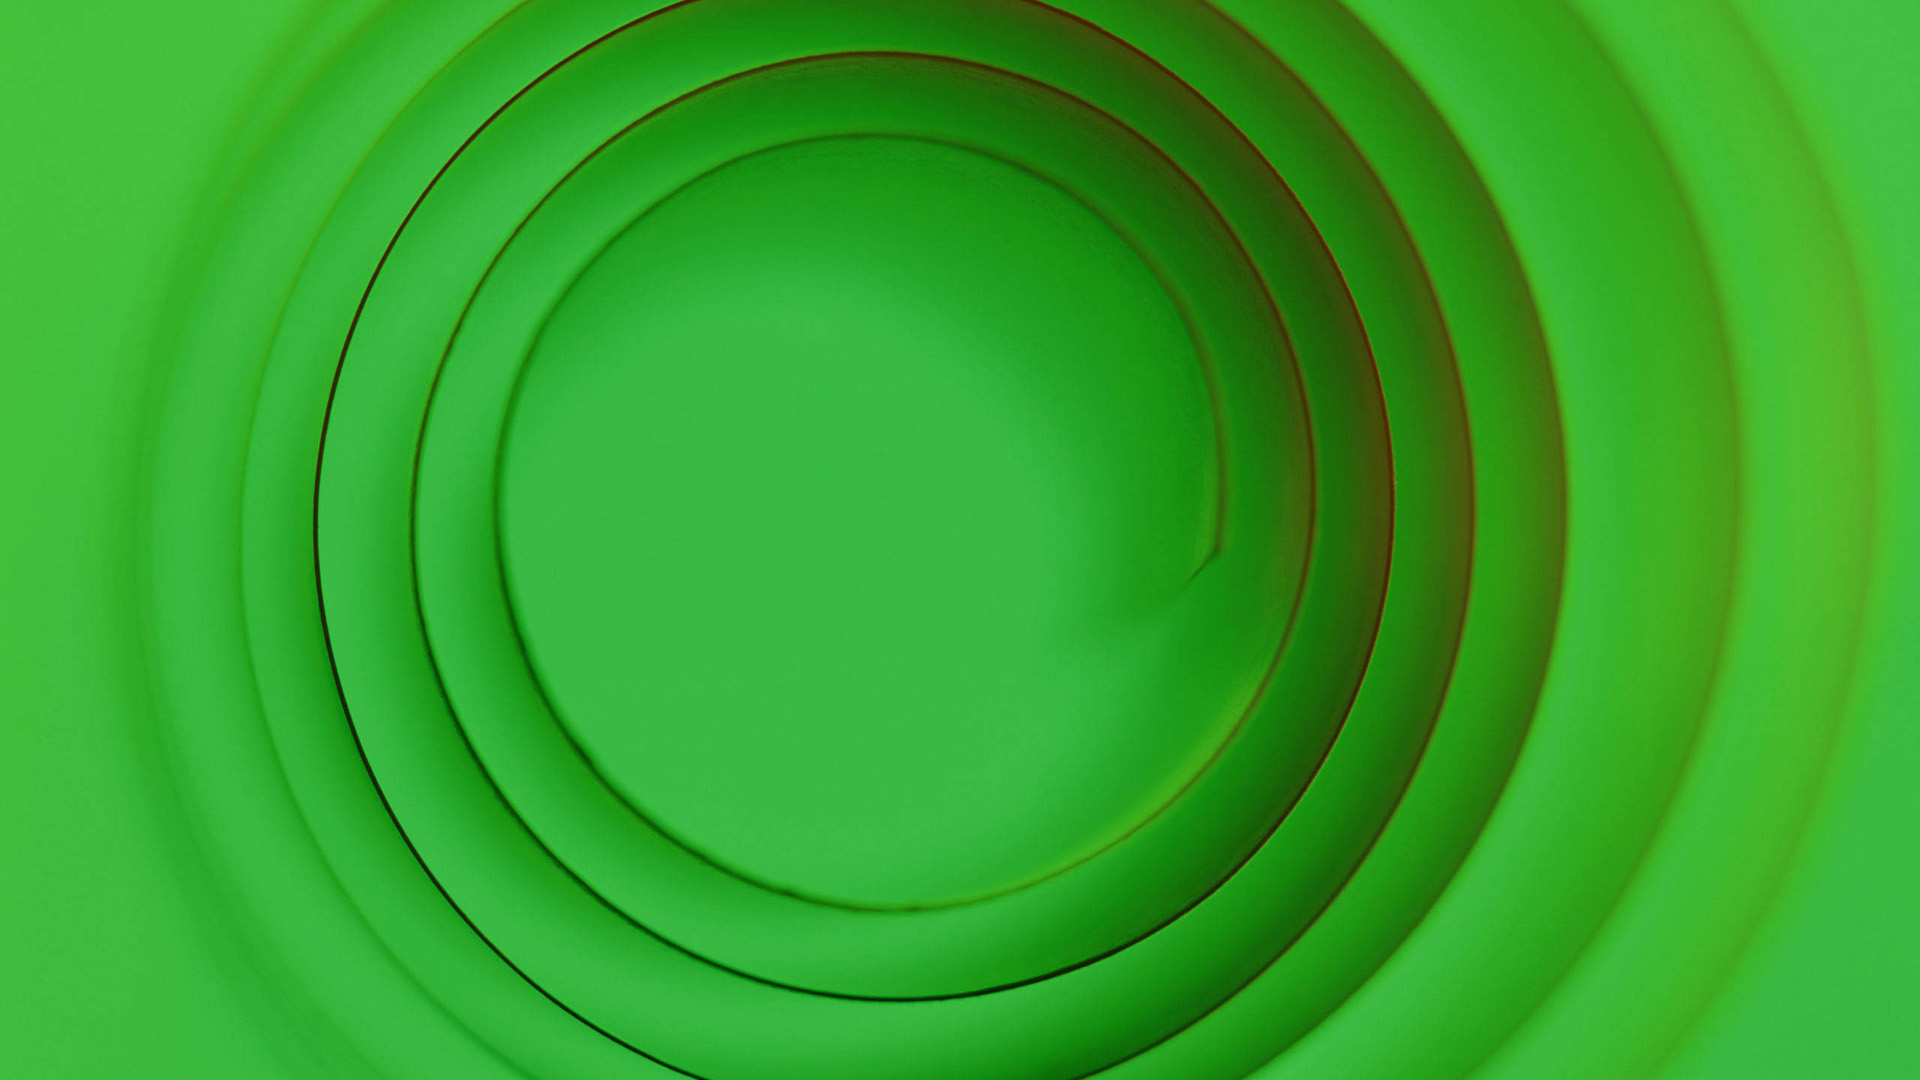 Green Swirl Wallpaper Background Pictures And Image